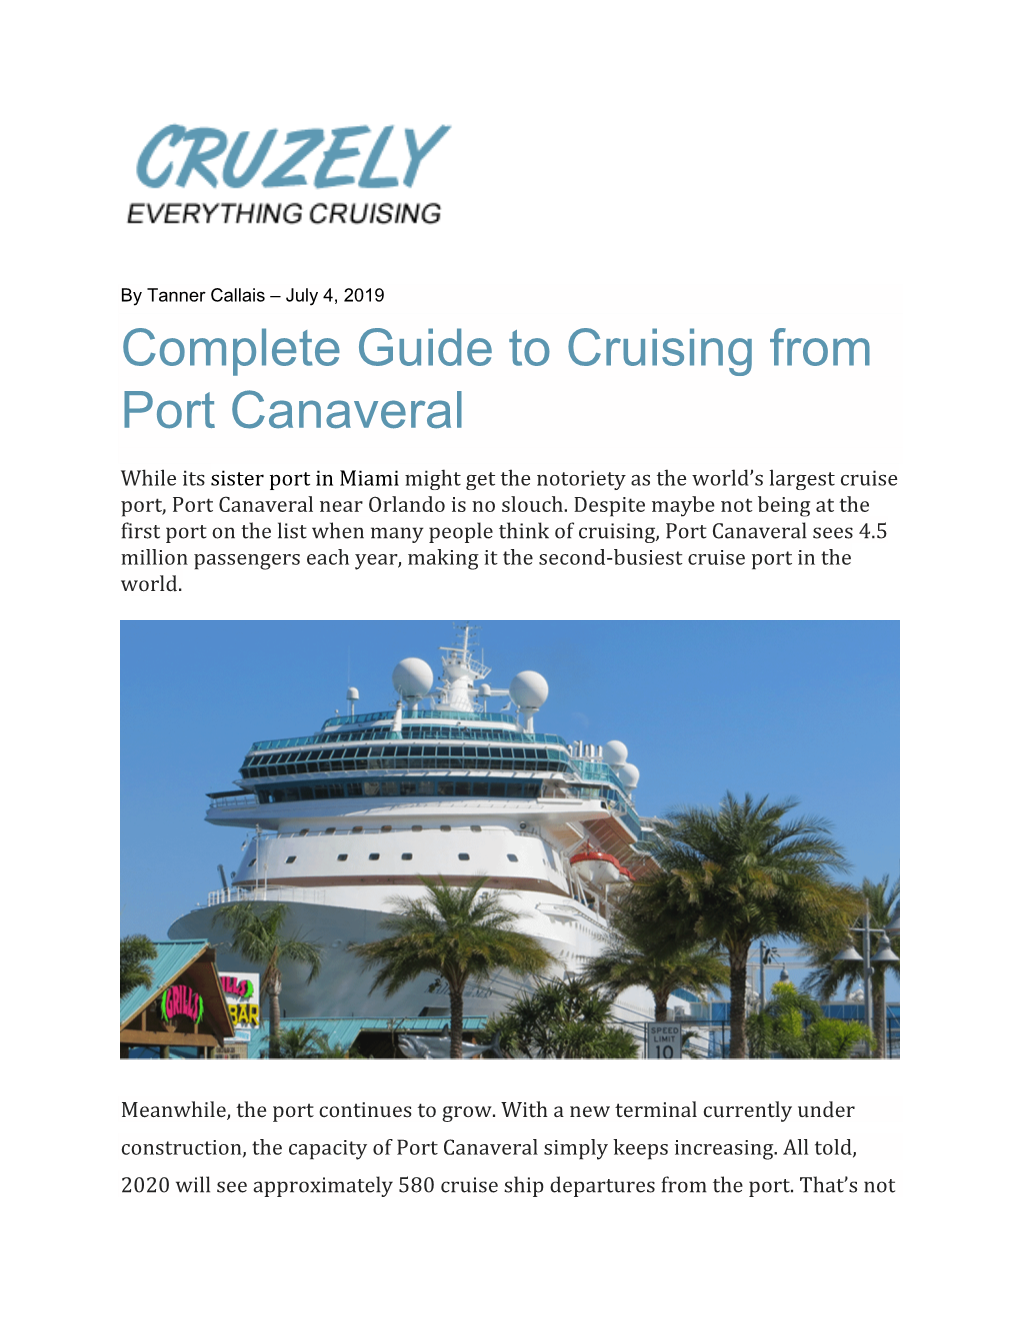 Complete Guide to Cruising from Port Canaveral